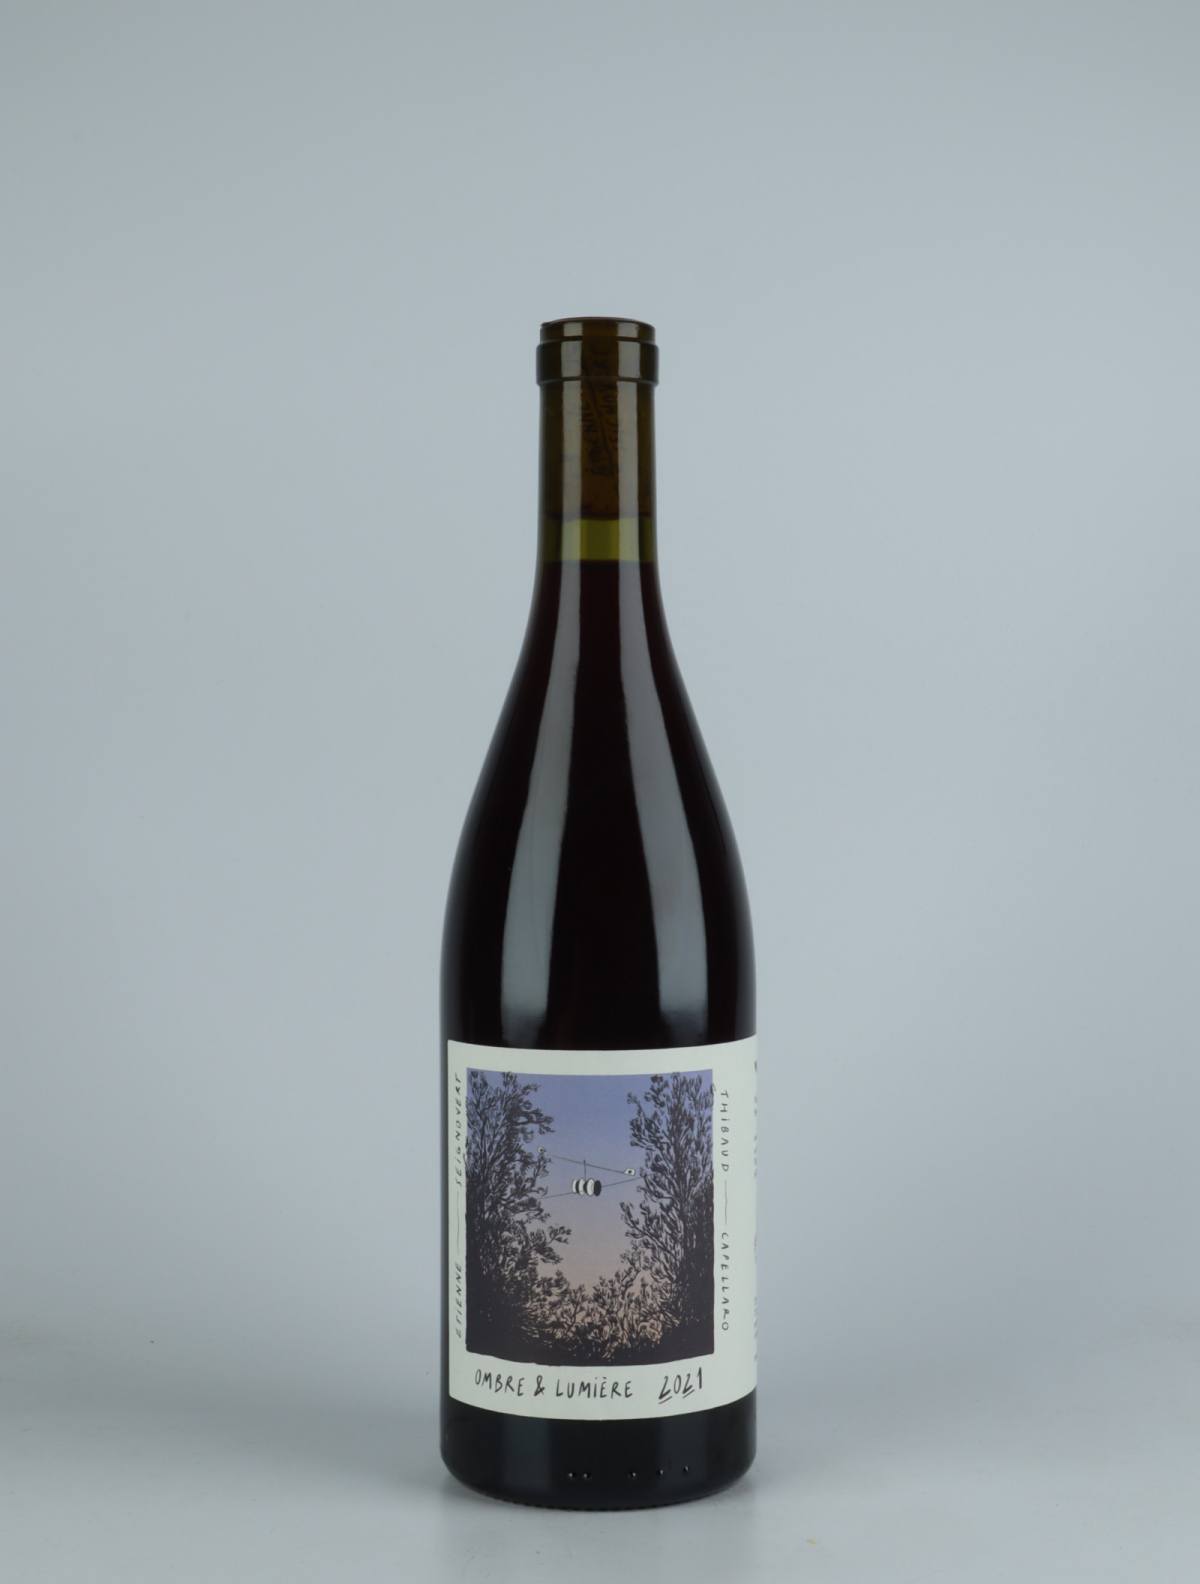 A bottle 2021 Ombre et Lumière Red wine from Slope, Rhône in France